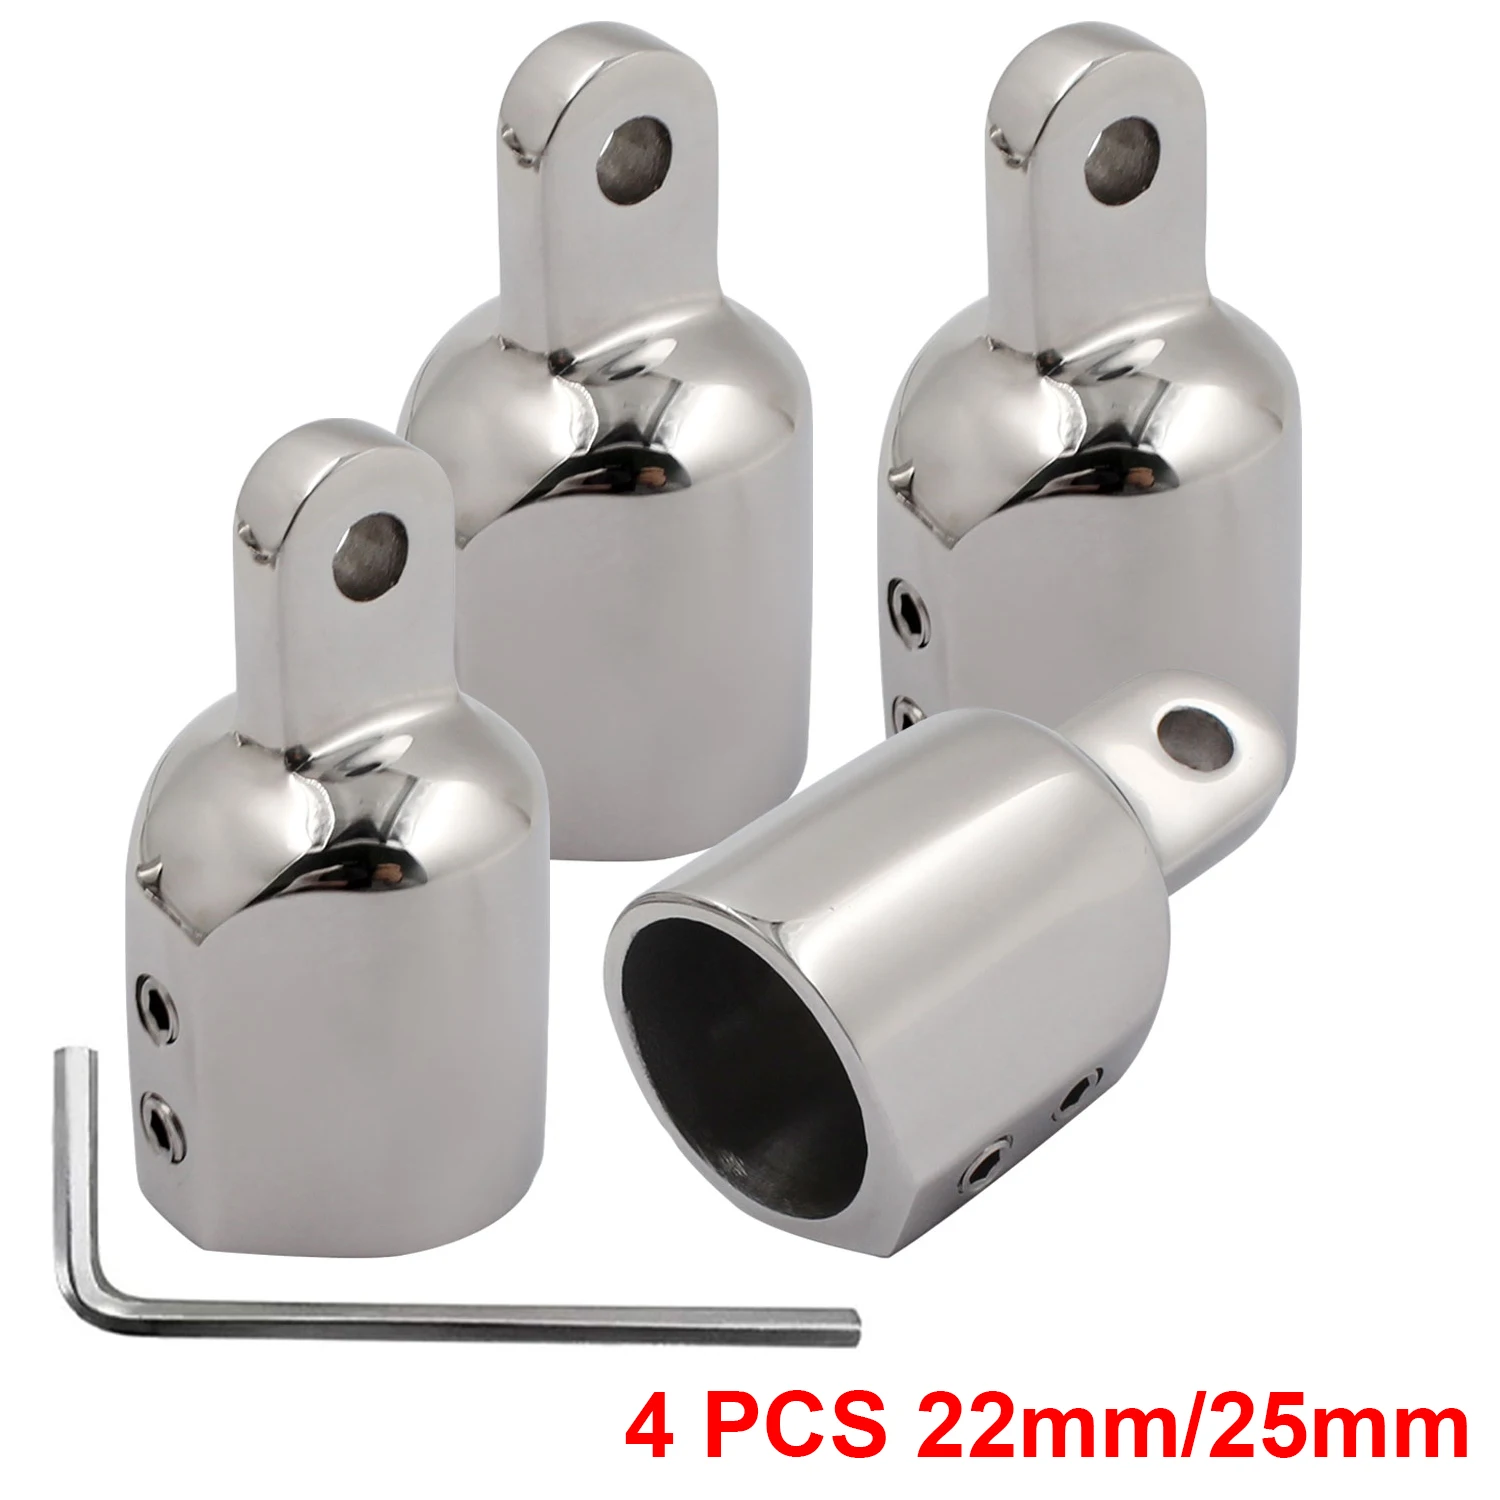 4 Pack 22mm/25mm Heavy Duty Bimini Top Cap Eye End Fitting Stainless Steel 316 Marine Hardware Boat External Eye End g99f 20 22 25 30 32mm 316 stainless steel fitting boat bimini top hinged with 2 screws jaw slide easy install marine hardware